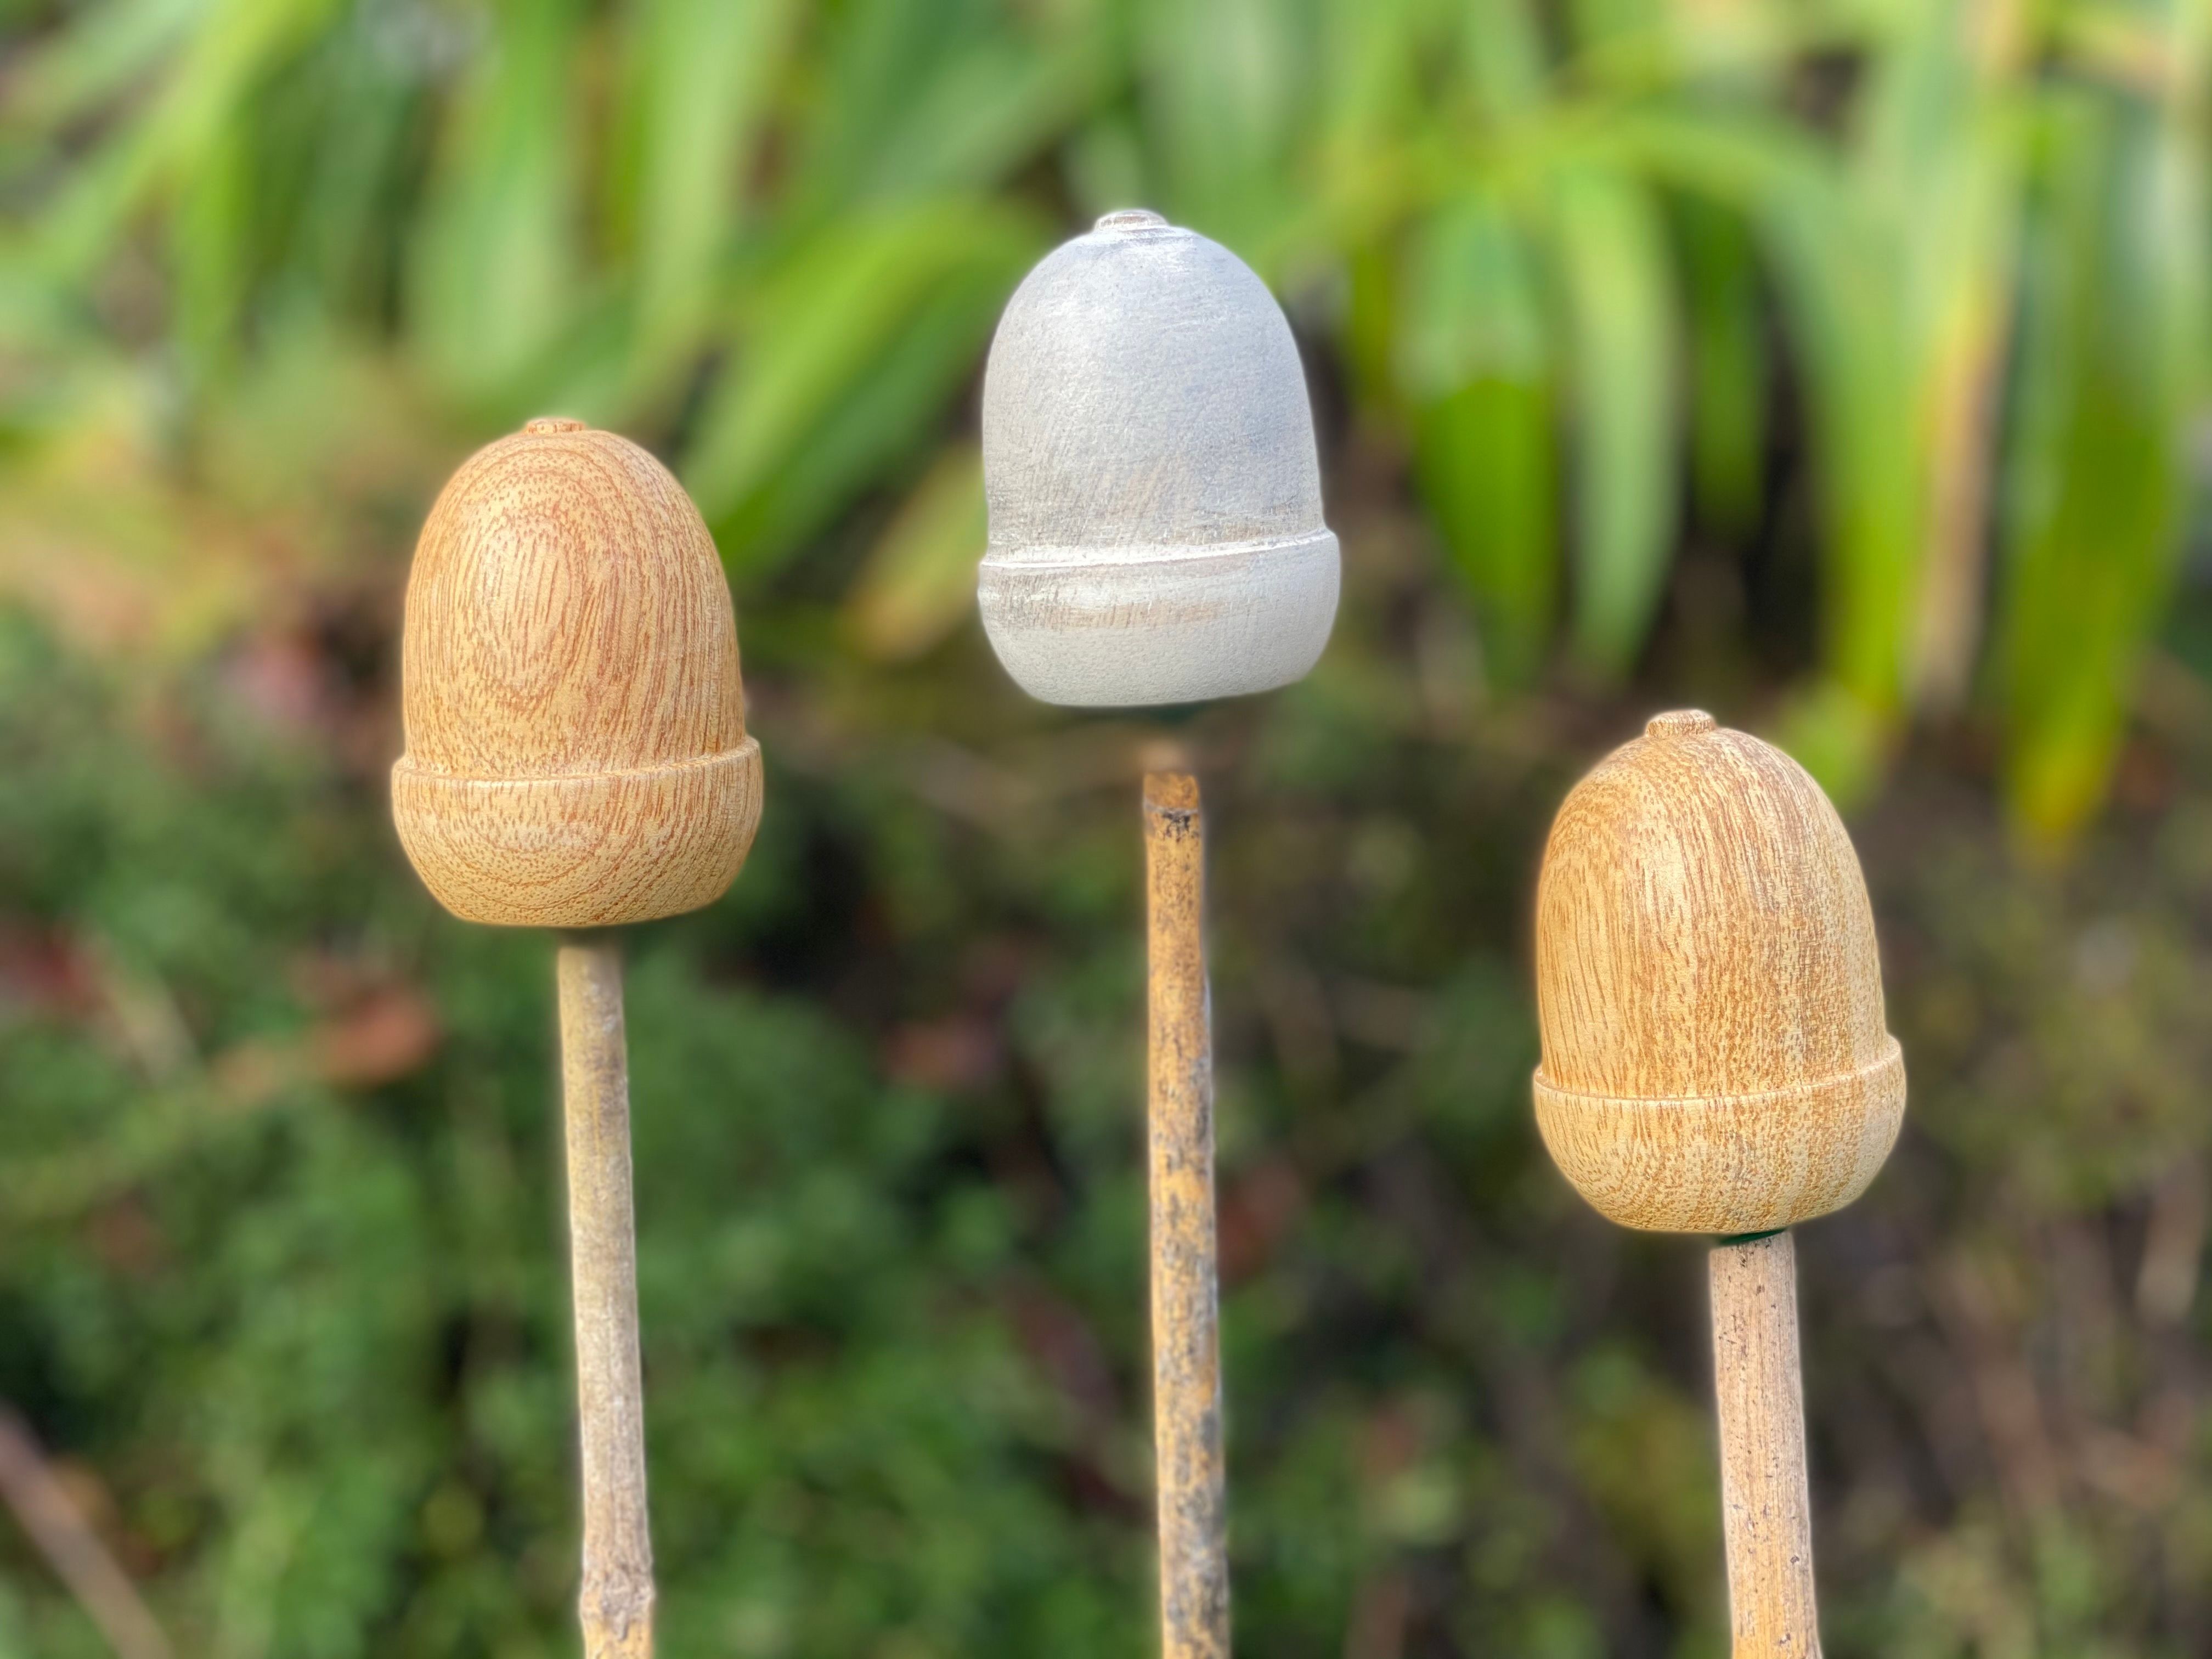 Acorn Cane Toppers - Heritage Gifts for Gardeners